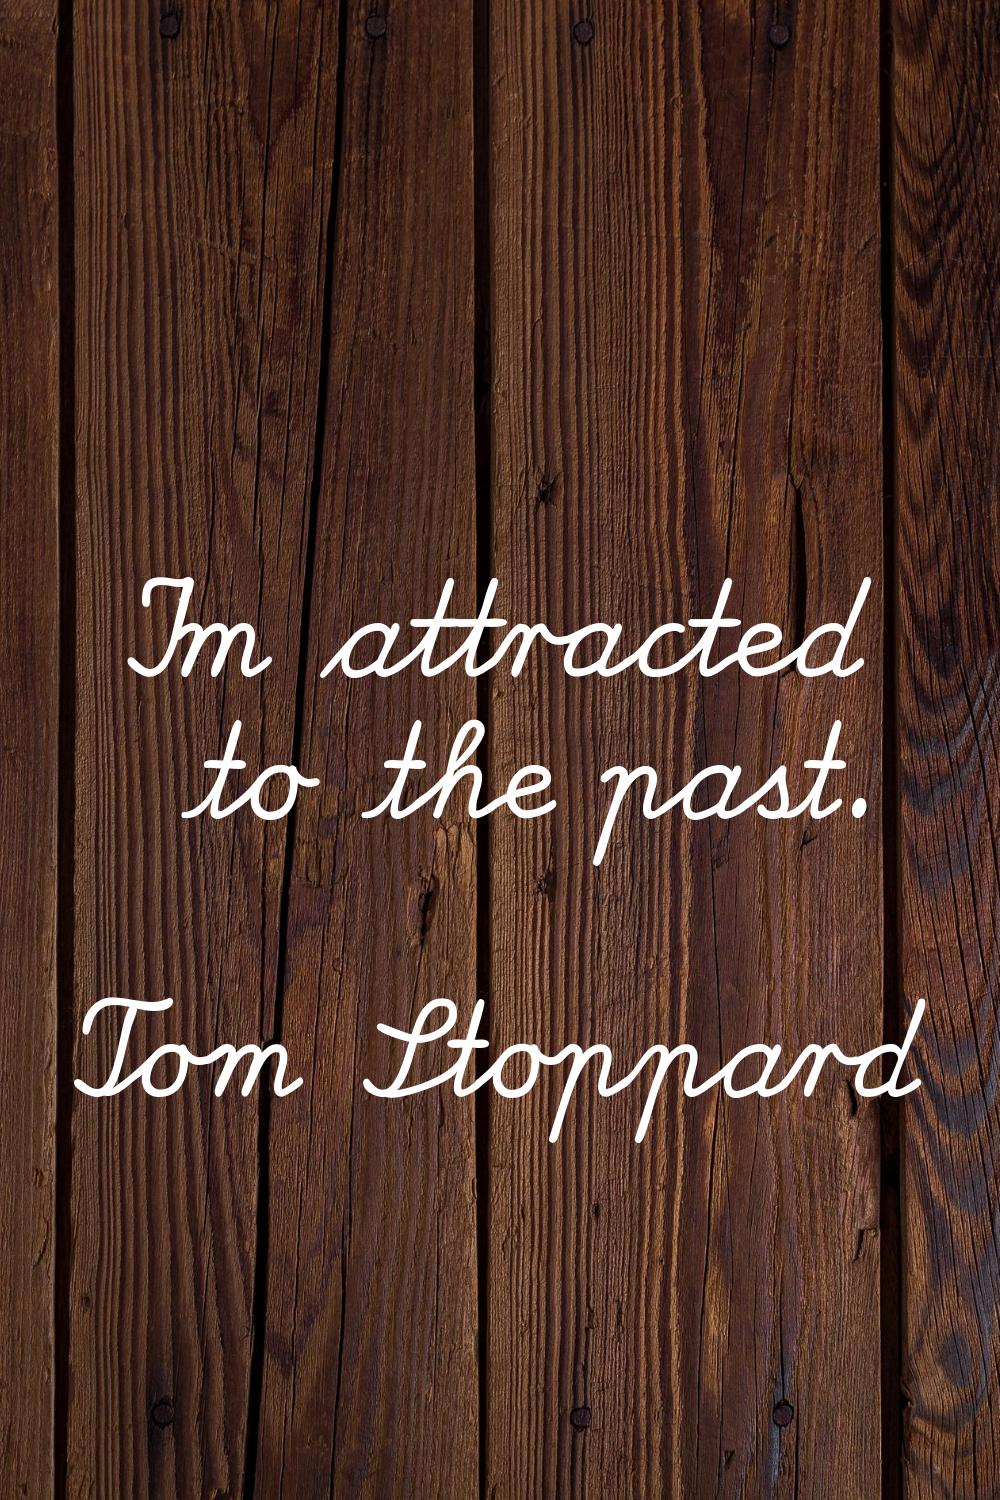 I'm attracted to the past.